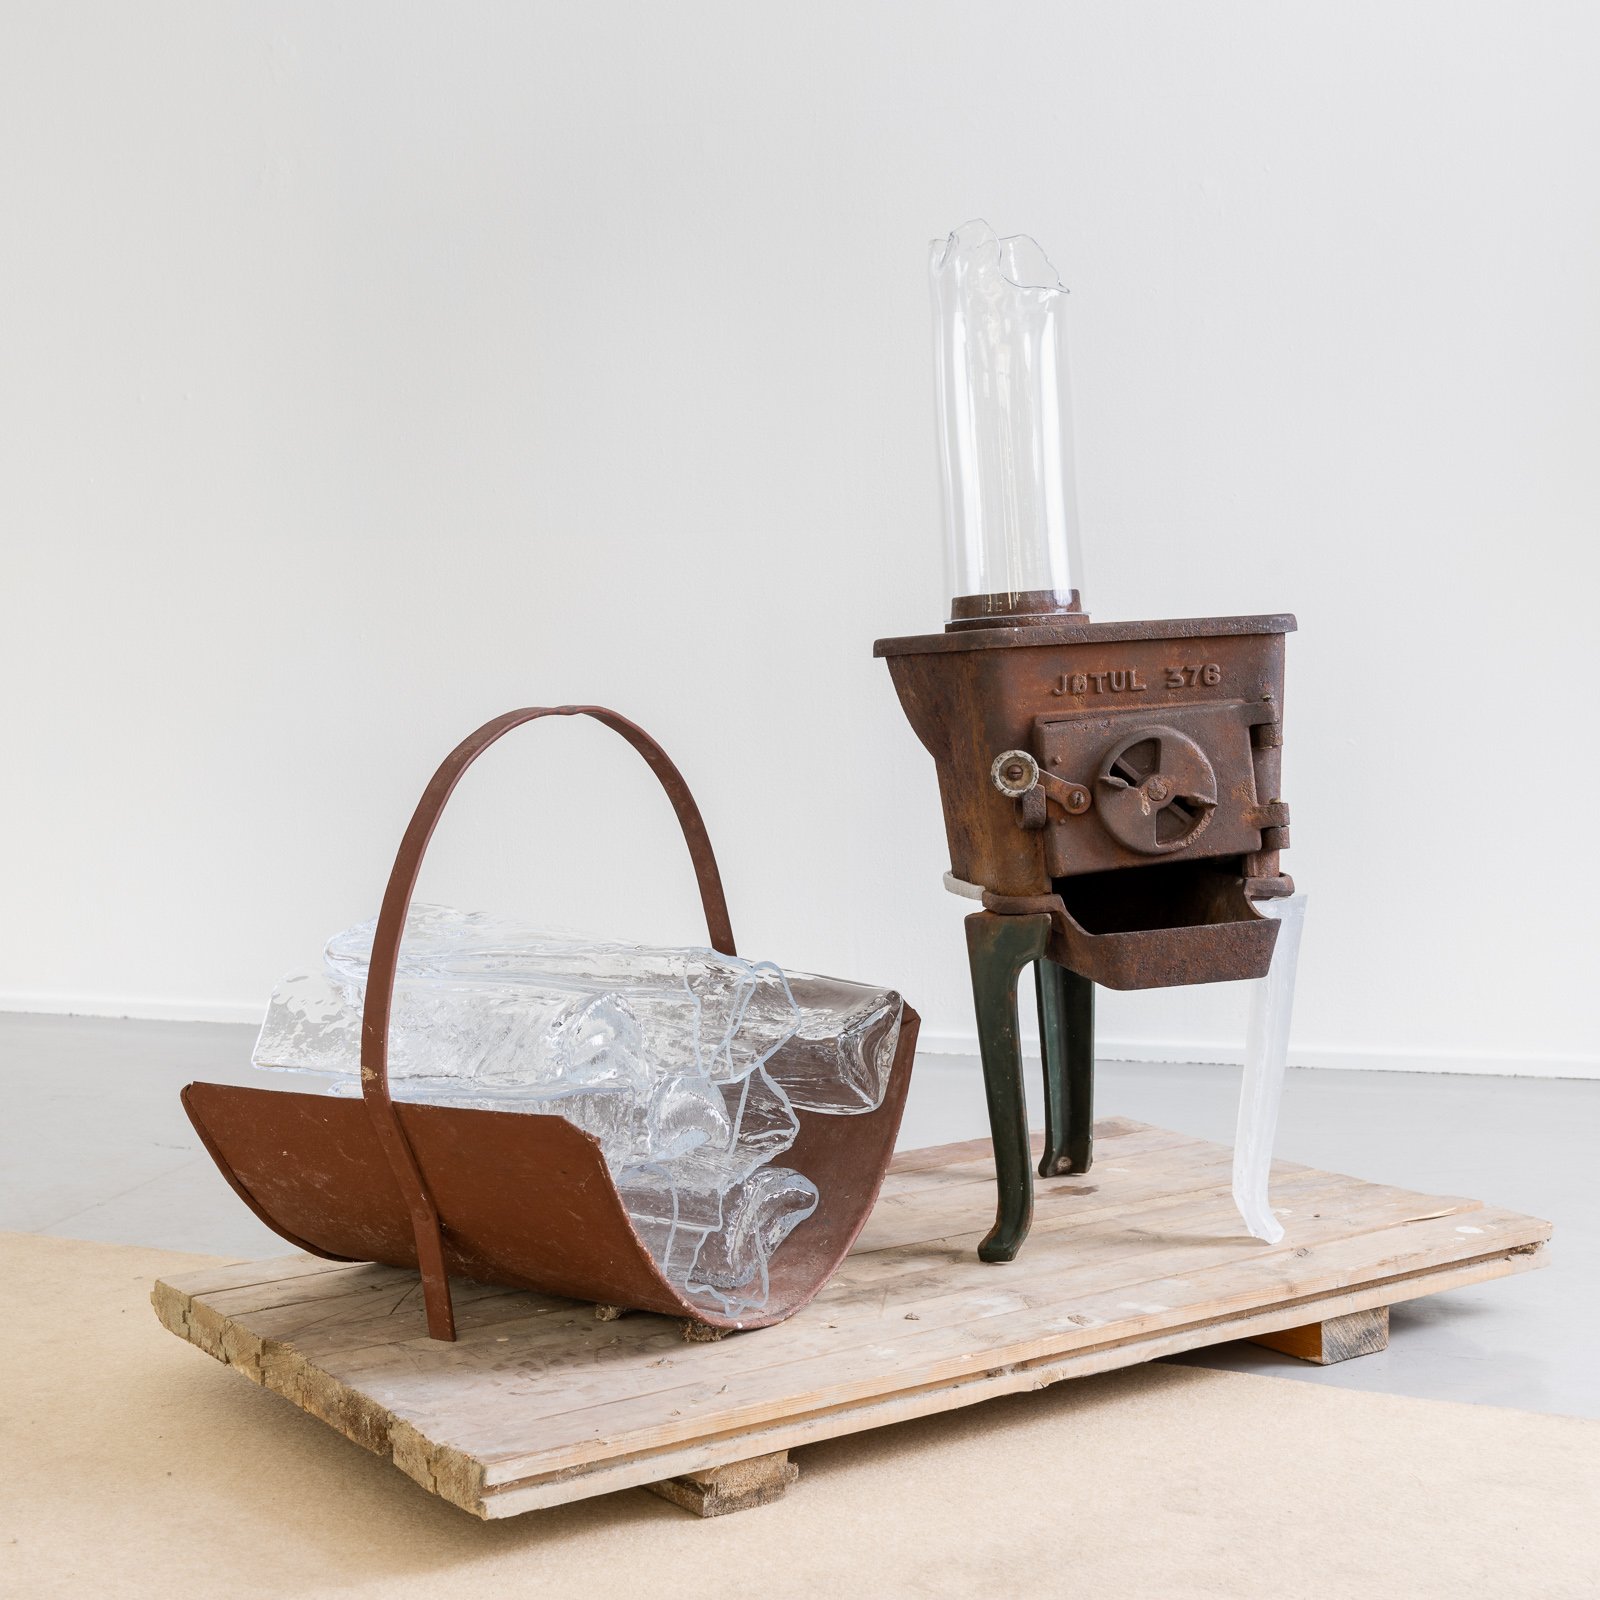      Jøtul 376    2022, Rescued object of cast iron, kiln cast and blown glass, grinded and polished   Photo: Thomas Tveter 